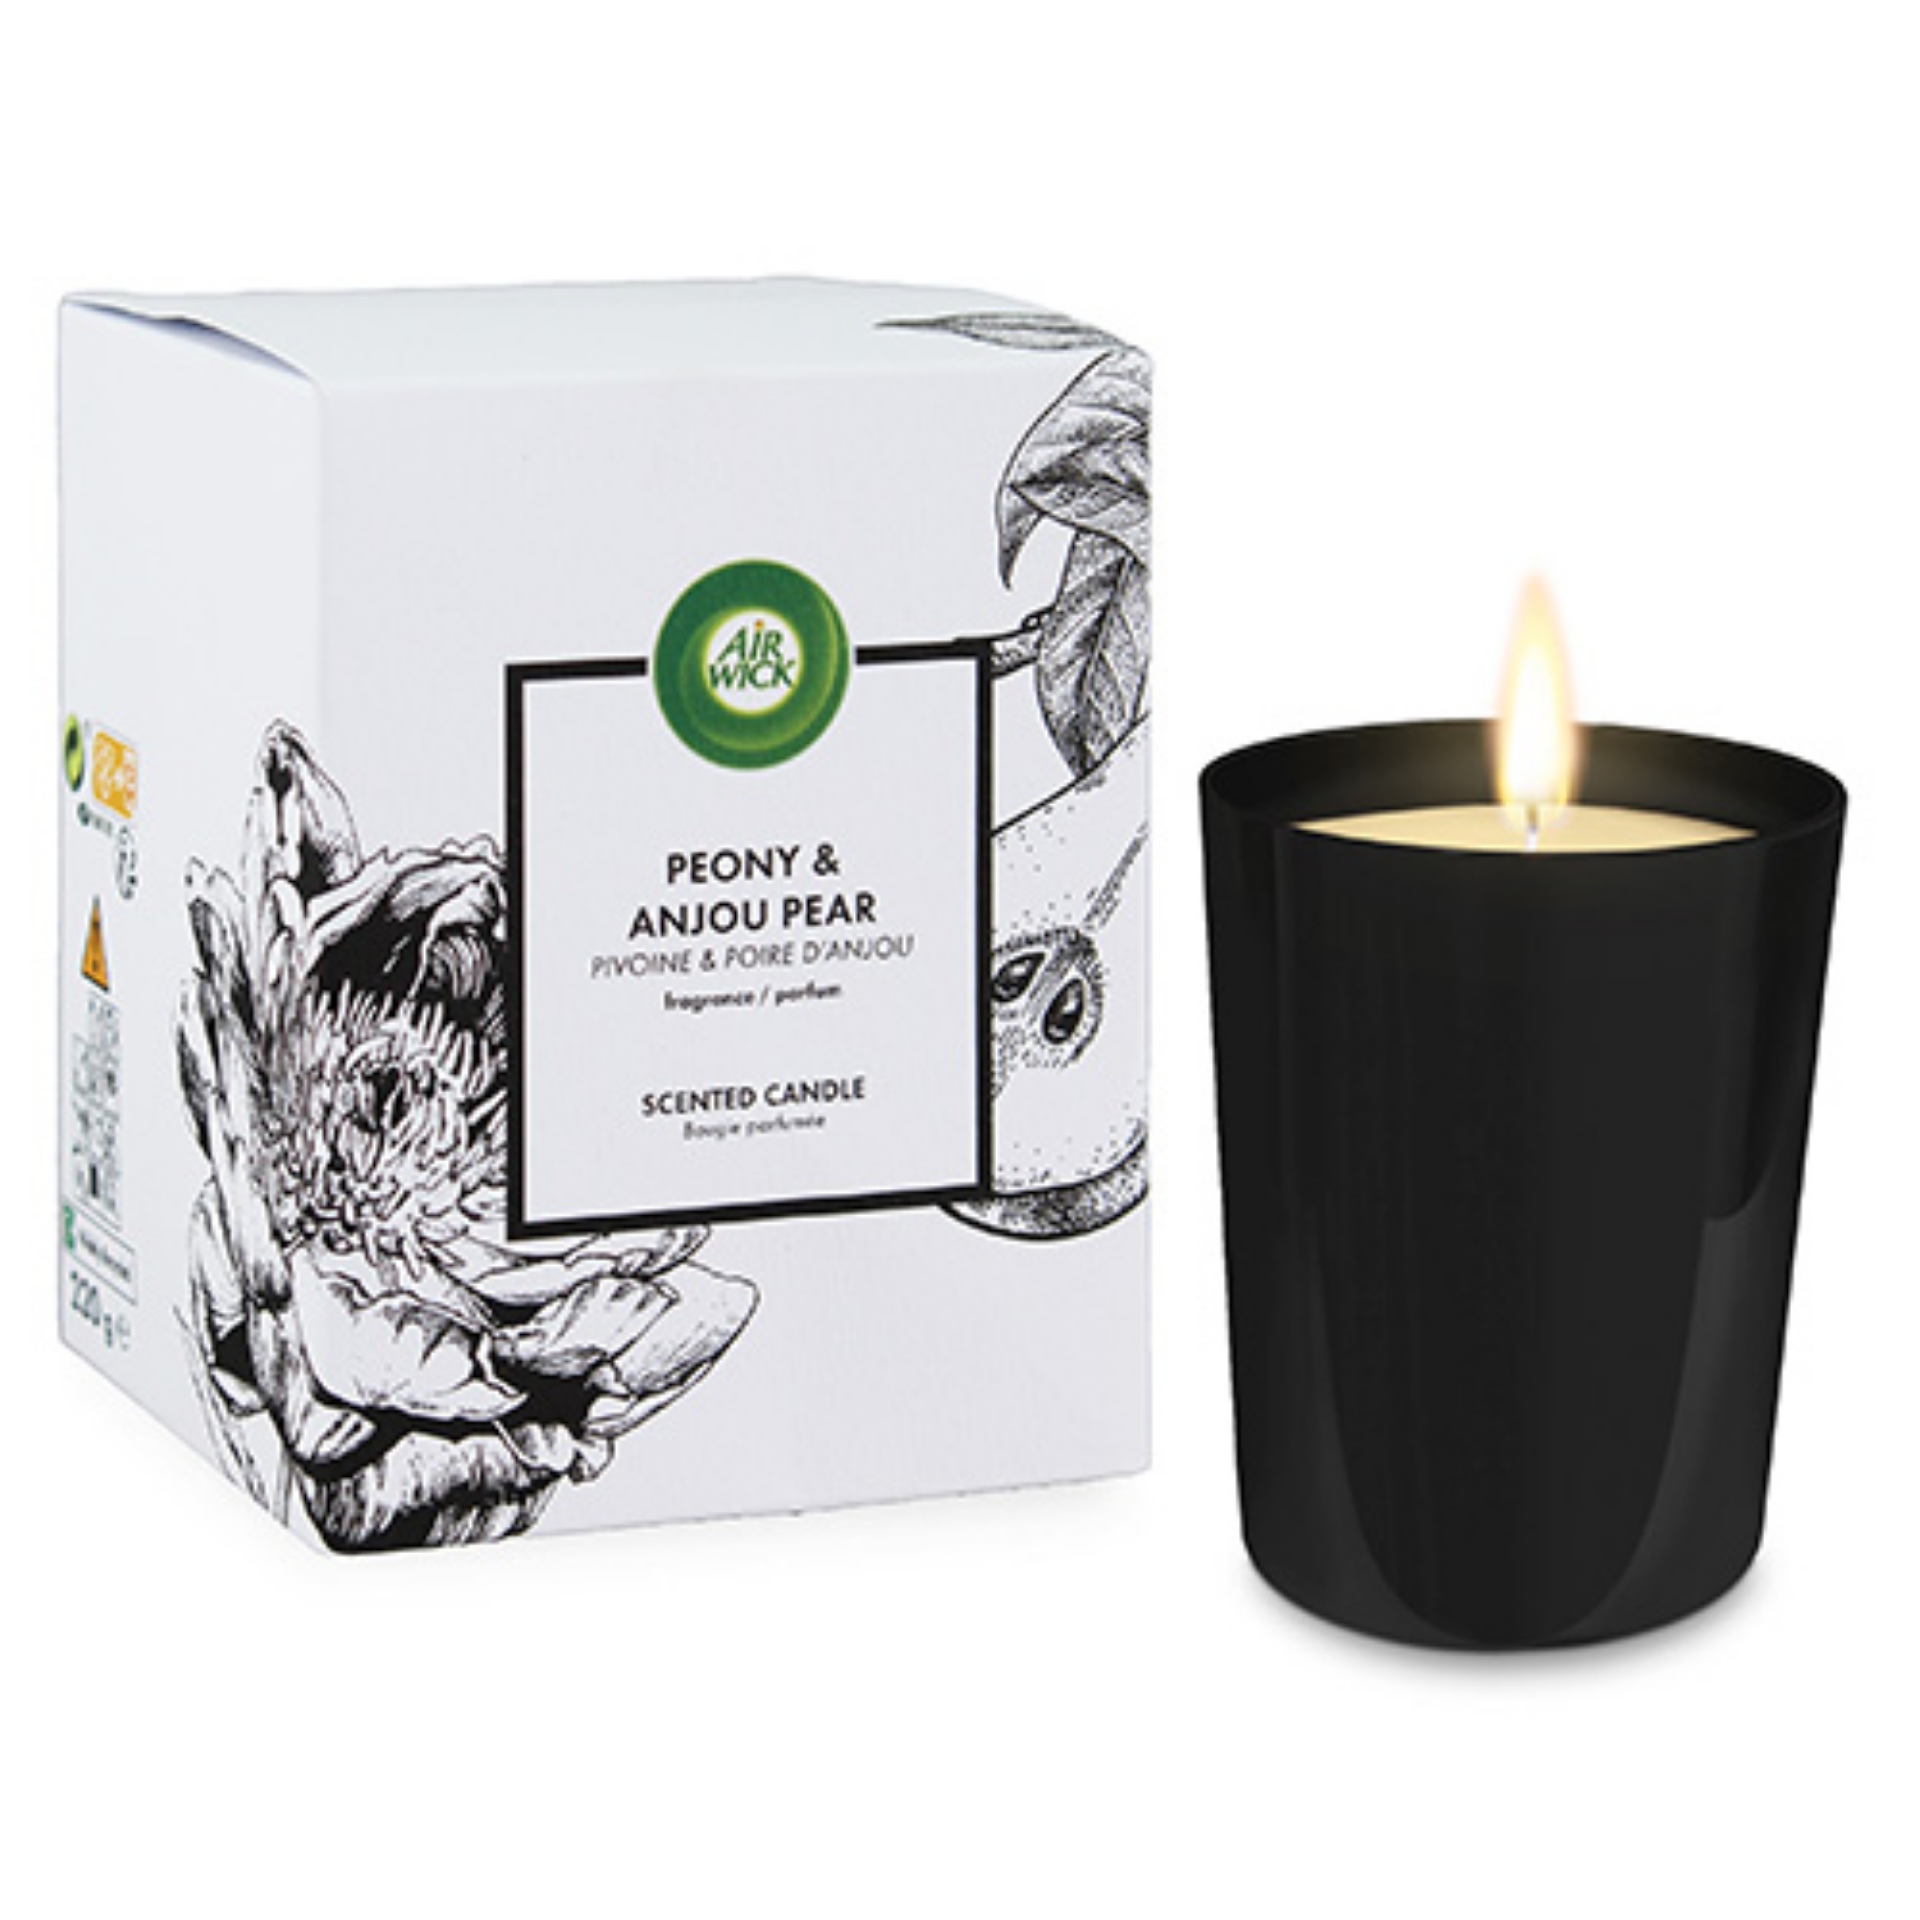 Picture of AIRWICK BOXED CANDLE - PEONY & PEAR (wsl)